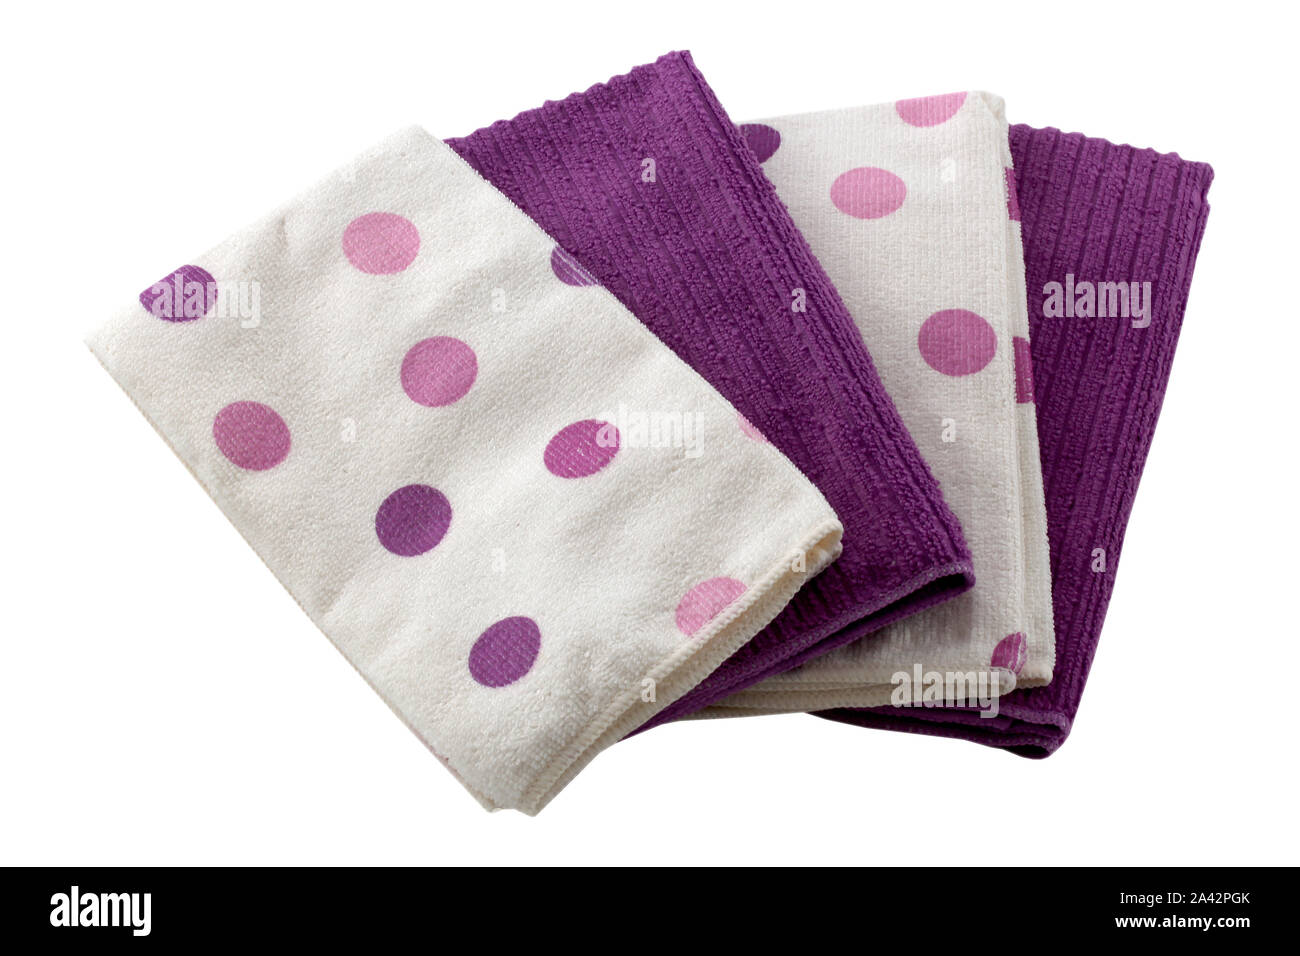 Set of microfiber dust cloths in purple and white with polka dots. Cloths are on a white background. Stock Photo